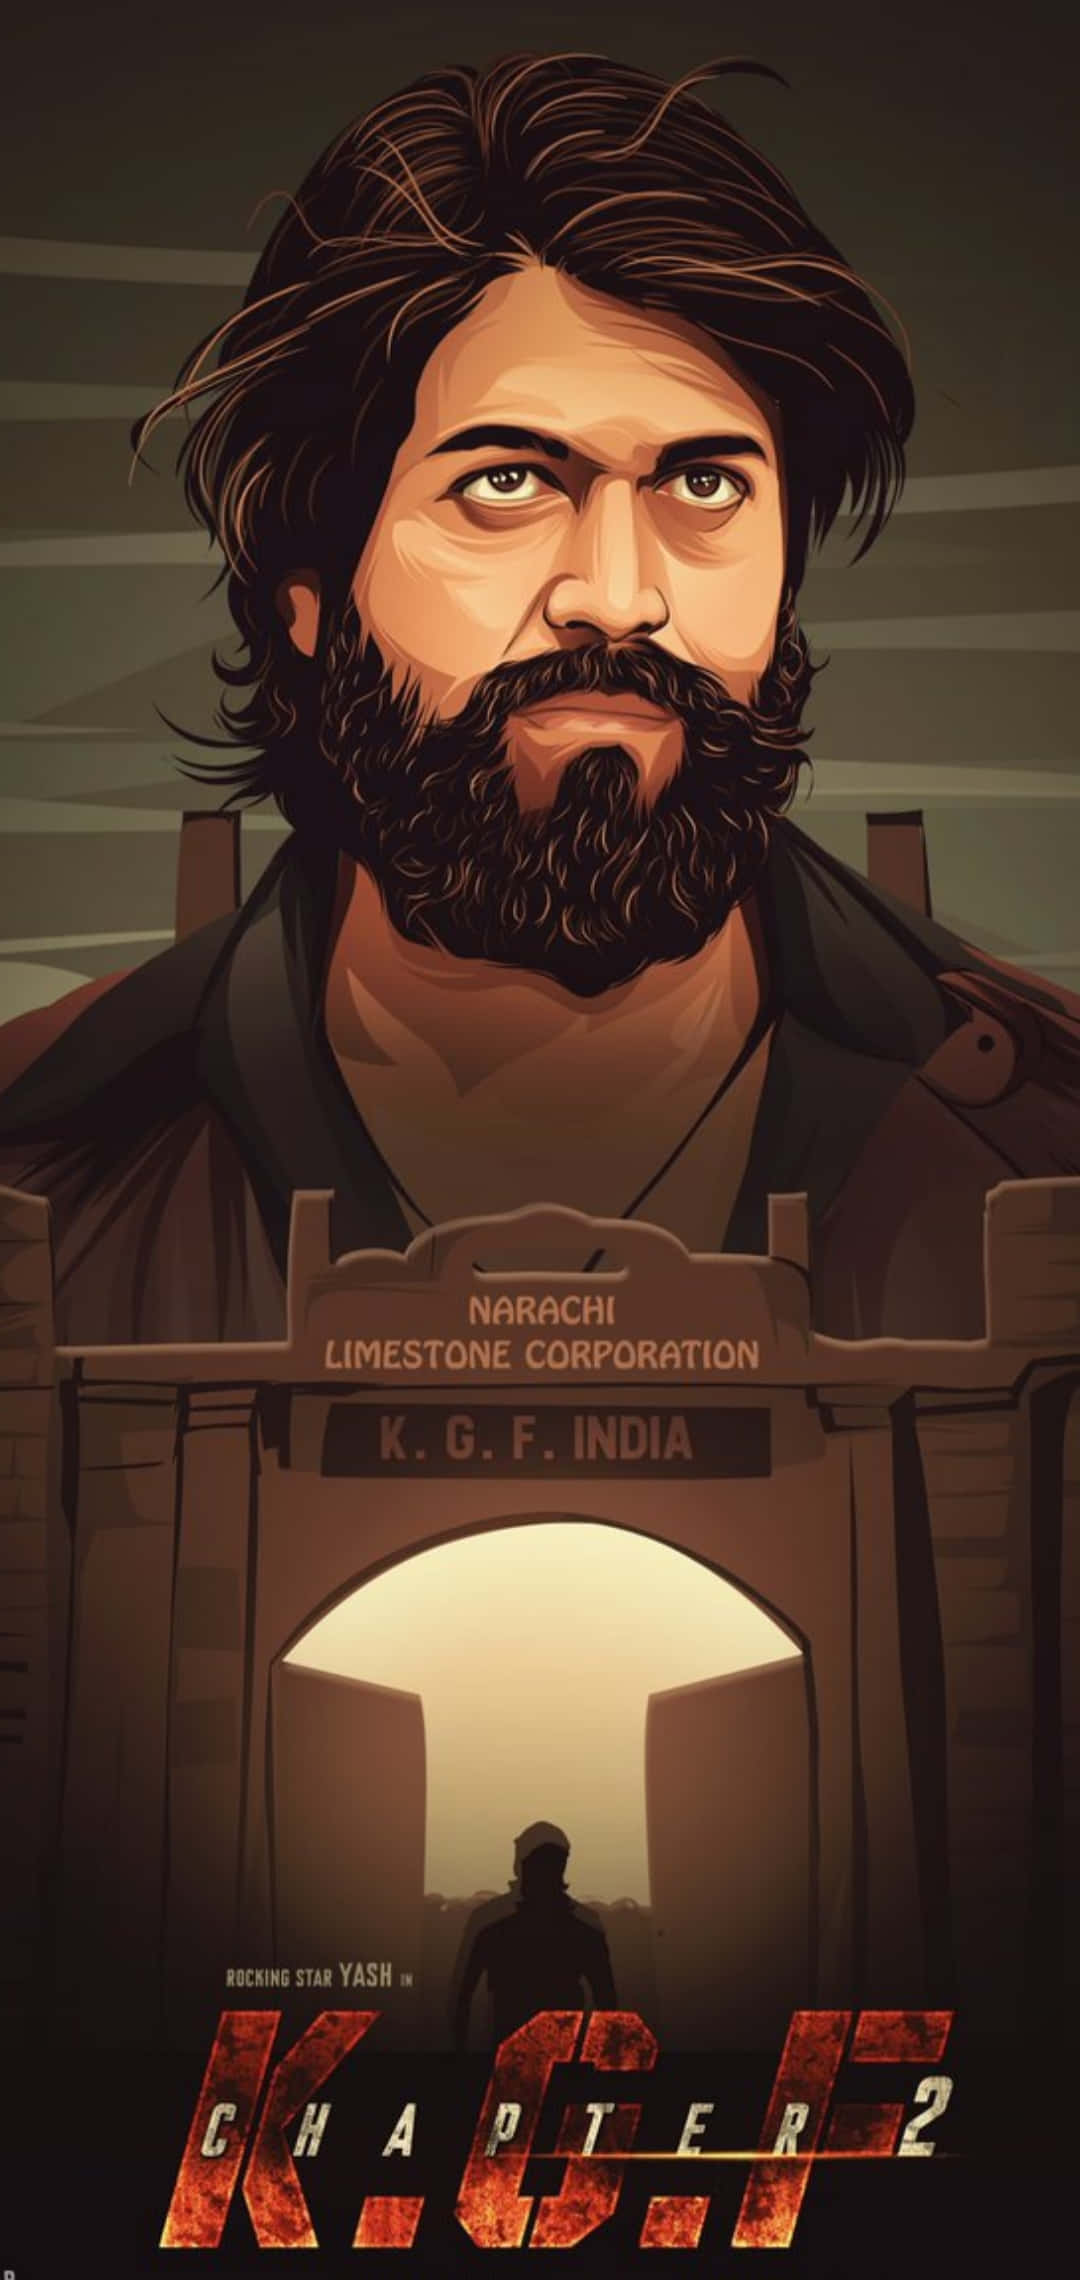 Rocky Bhai in KGF Chapter 2 as the Dominant Force in the Mines